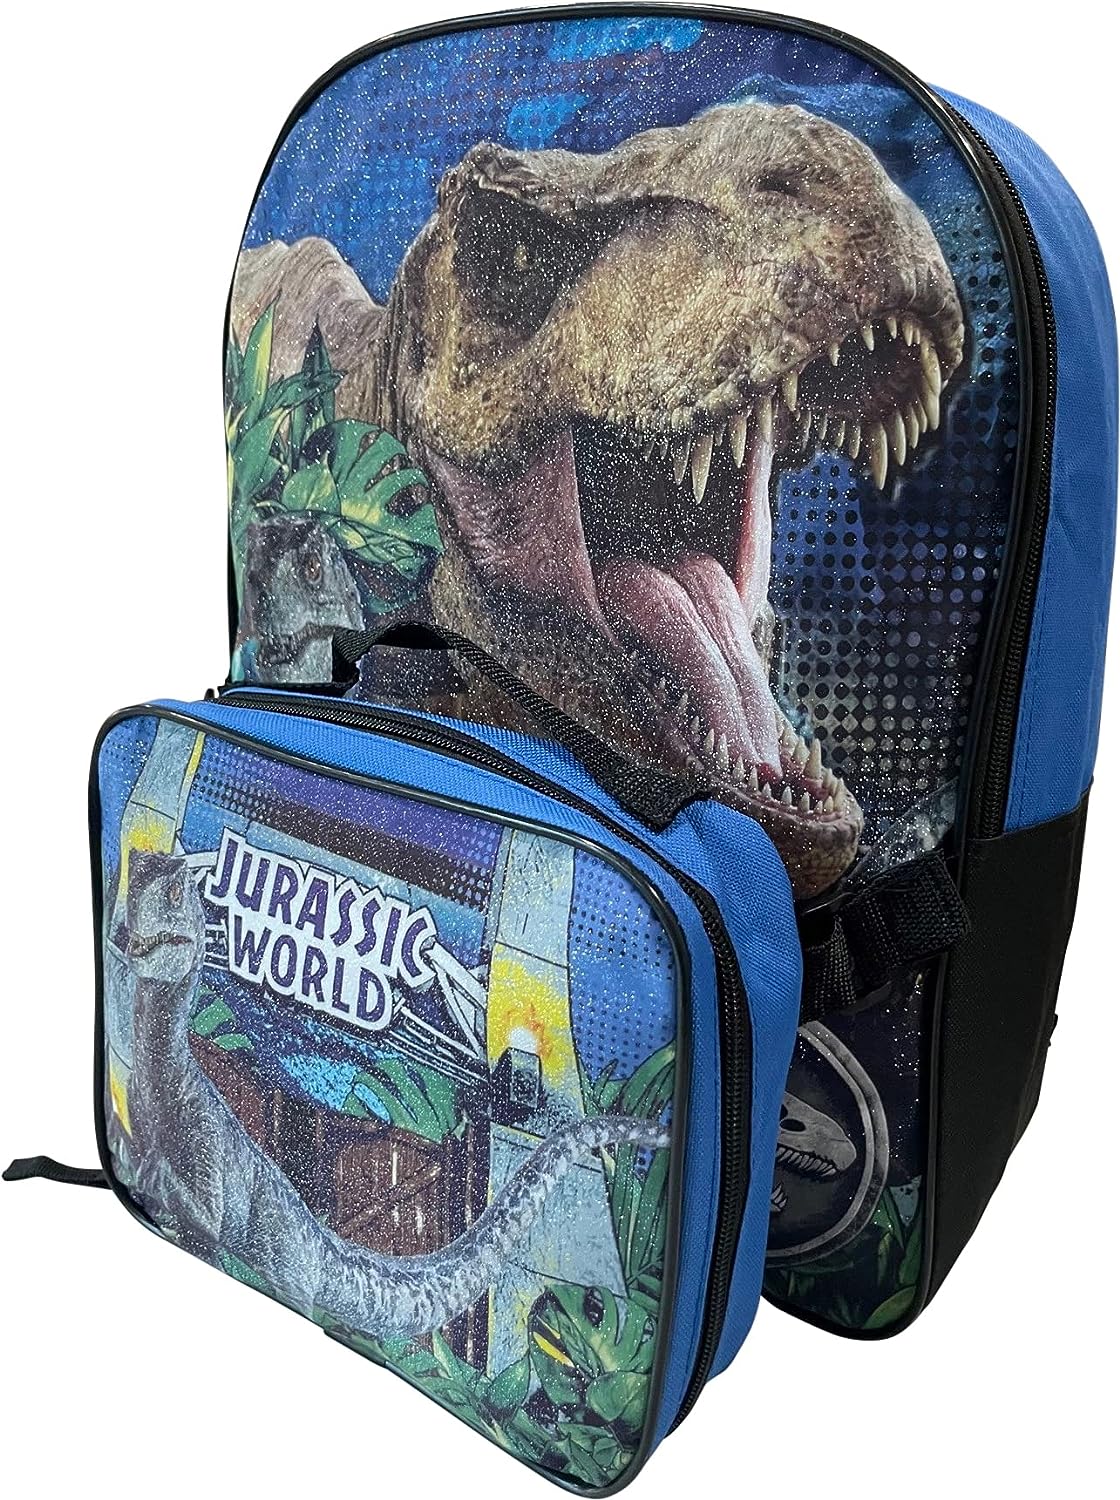 Jurassic world lunch box with backpack bag from Fast Word